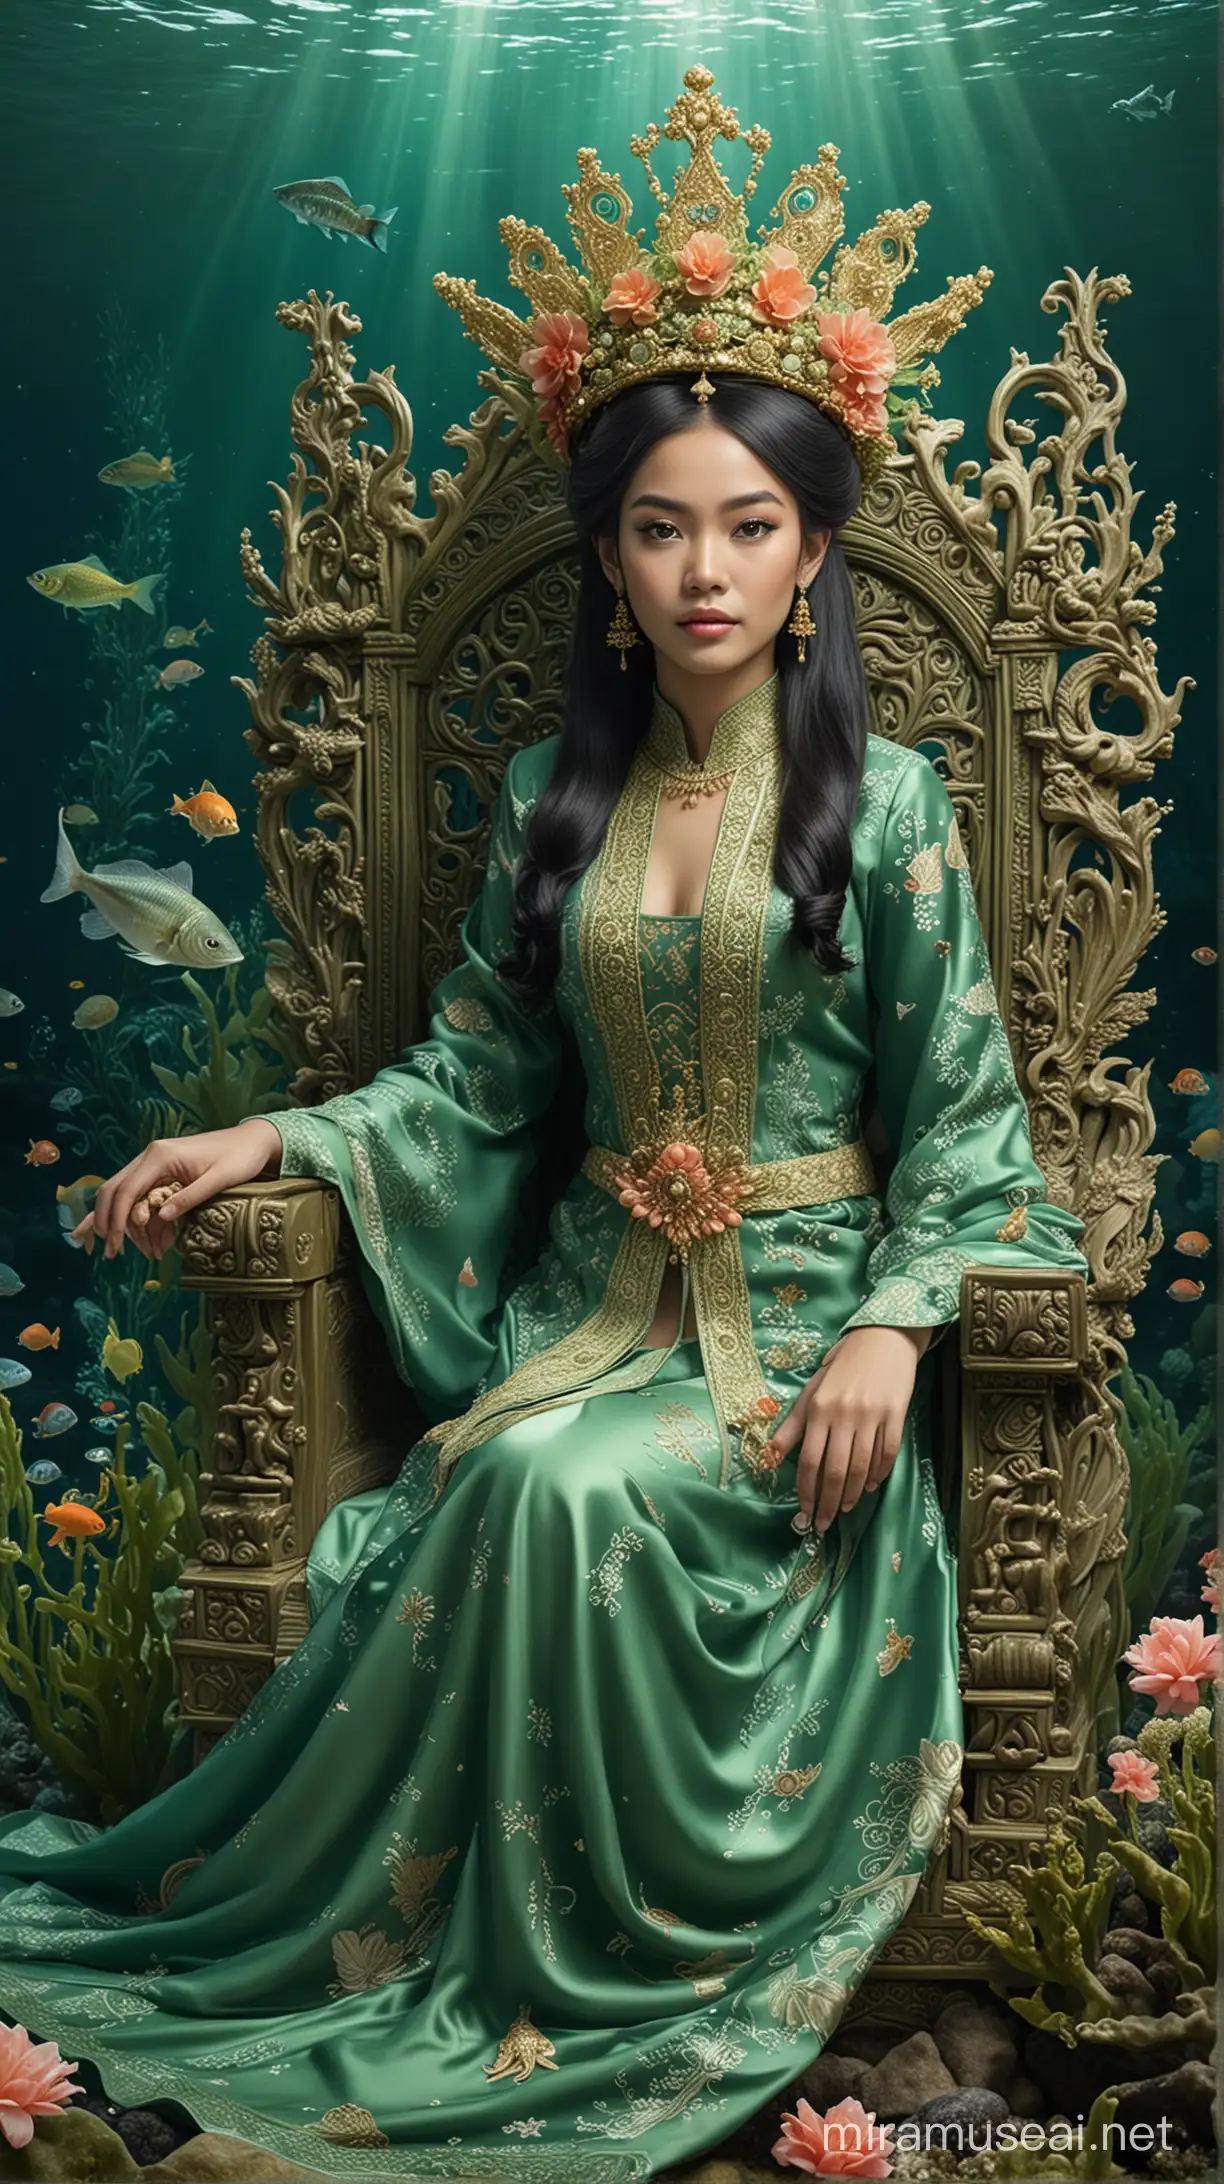 Nyi Roro Kidul Queen of the Sea Kingdom Enthroned in Majestic Green Amidst Underwater Splendor